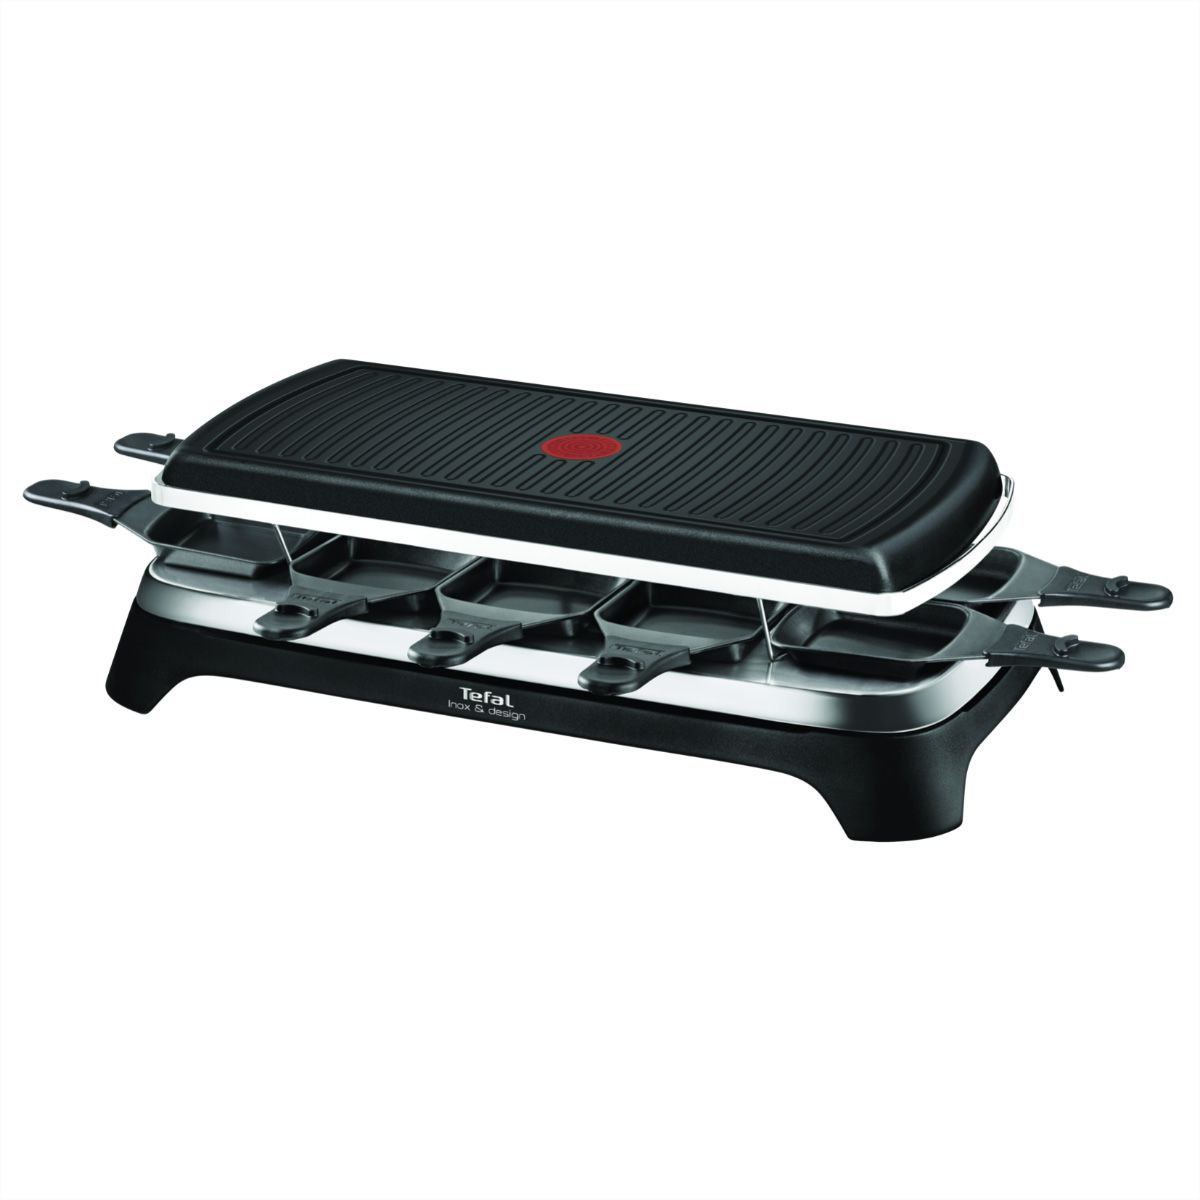 Tefal raclette et barbecue RE458812CH, Ambiance Inox & Design - COOL AG